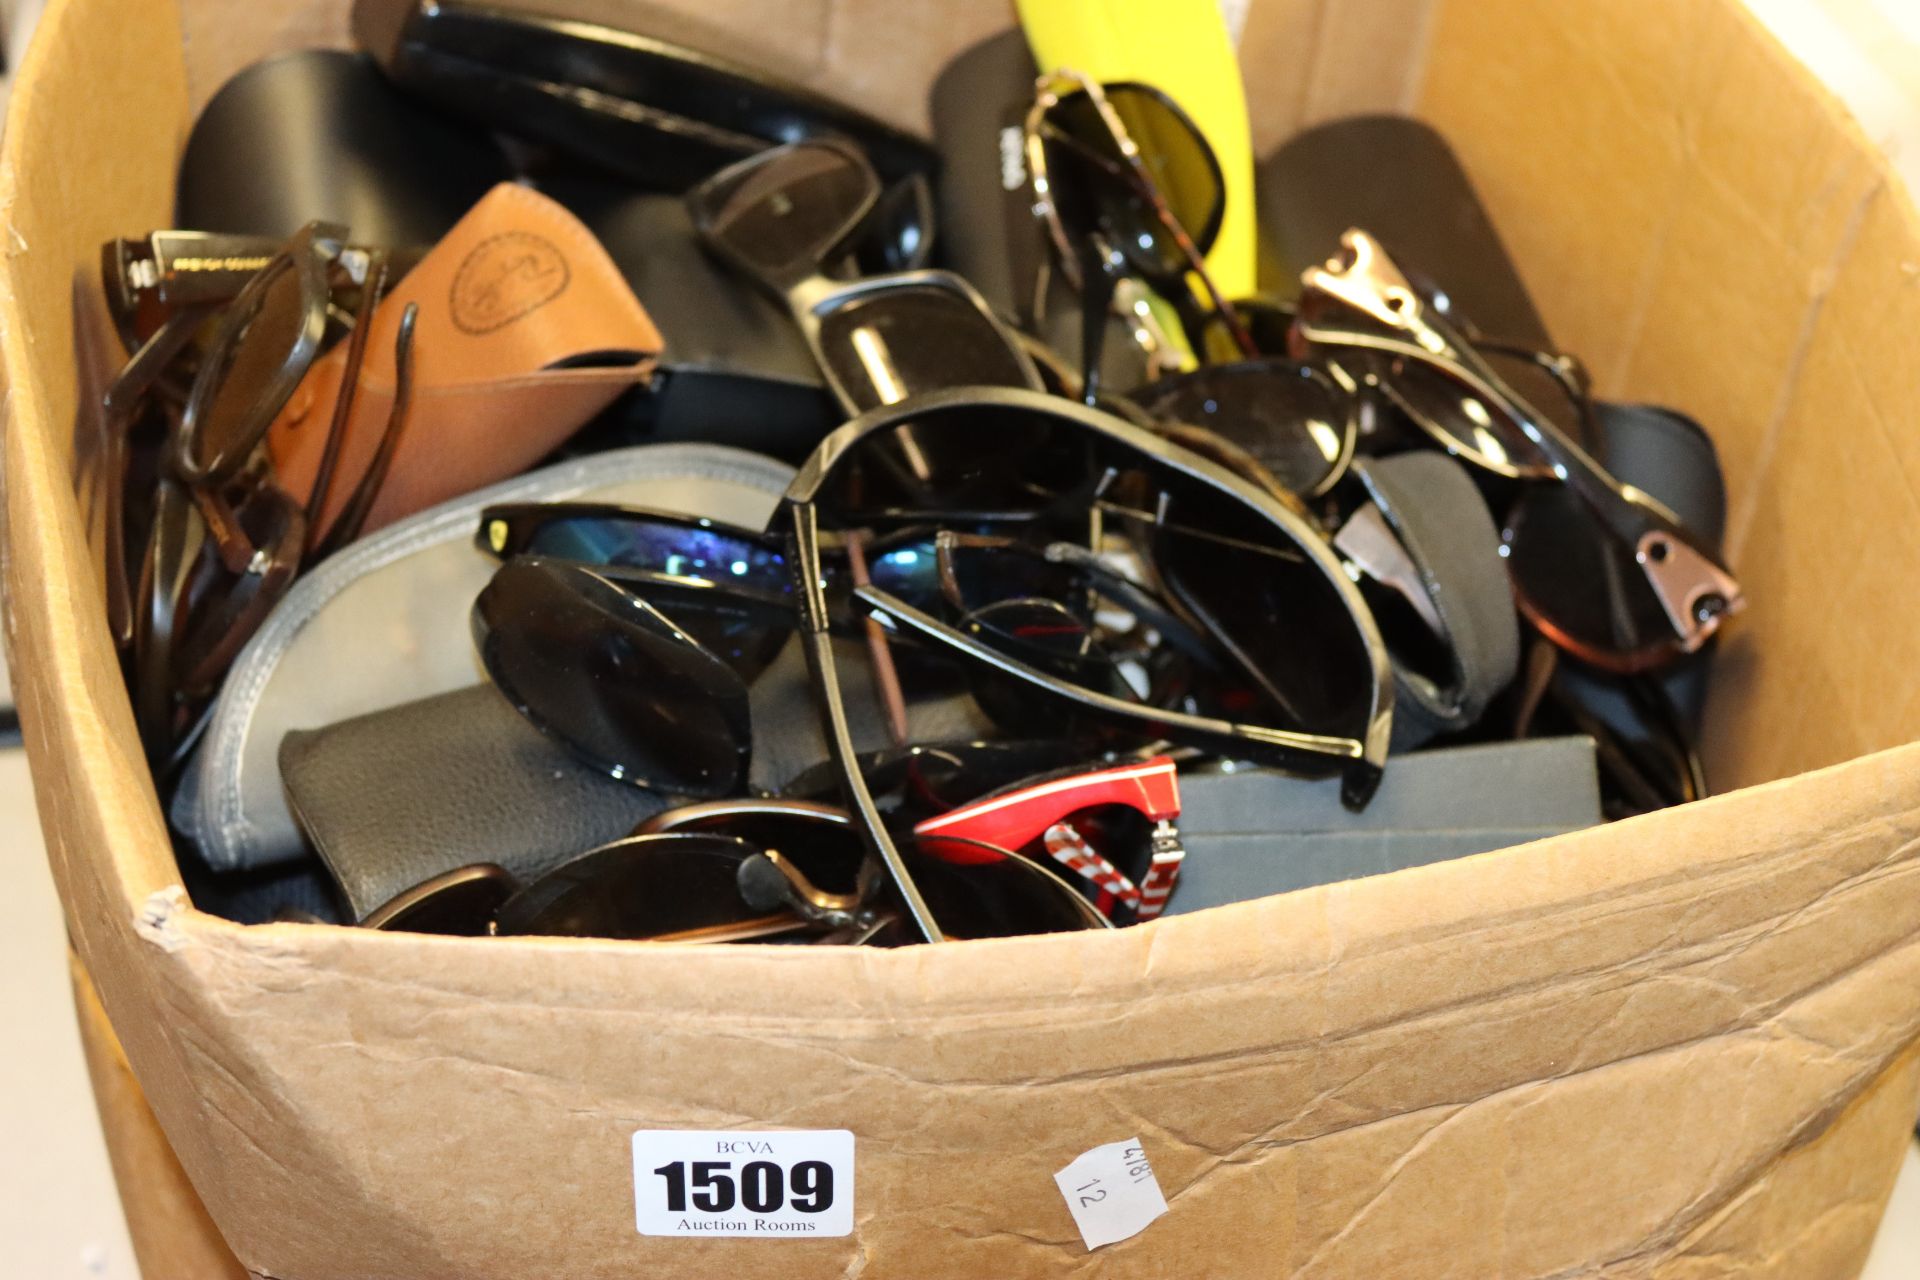 A quantity of unbranded sunglasses.